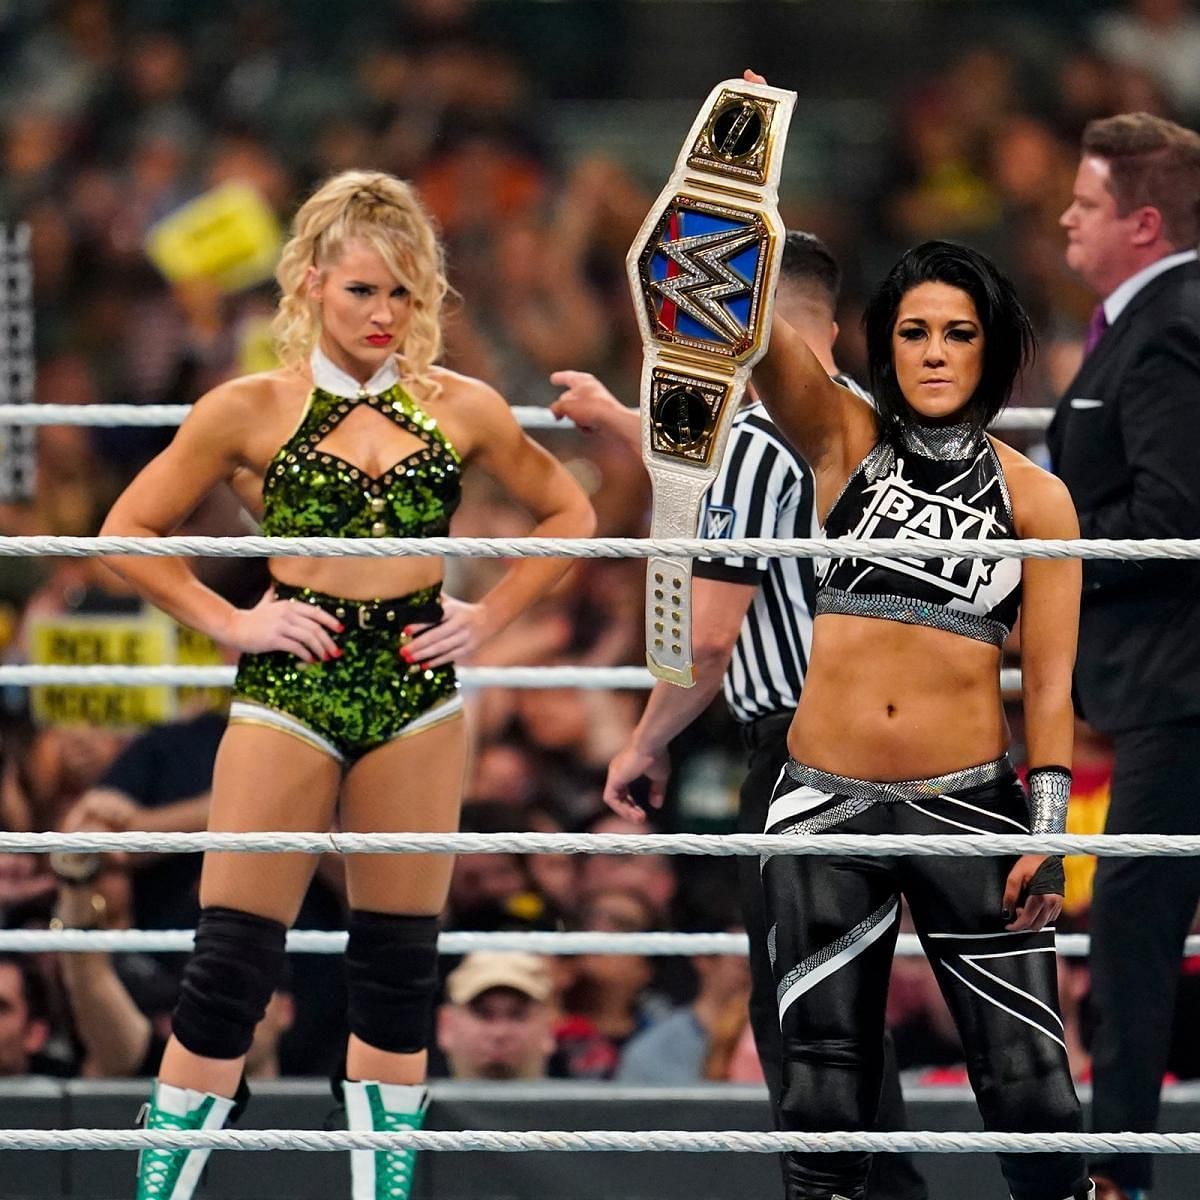 There are some intriguing tag team possibilities in the women&#039;s division